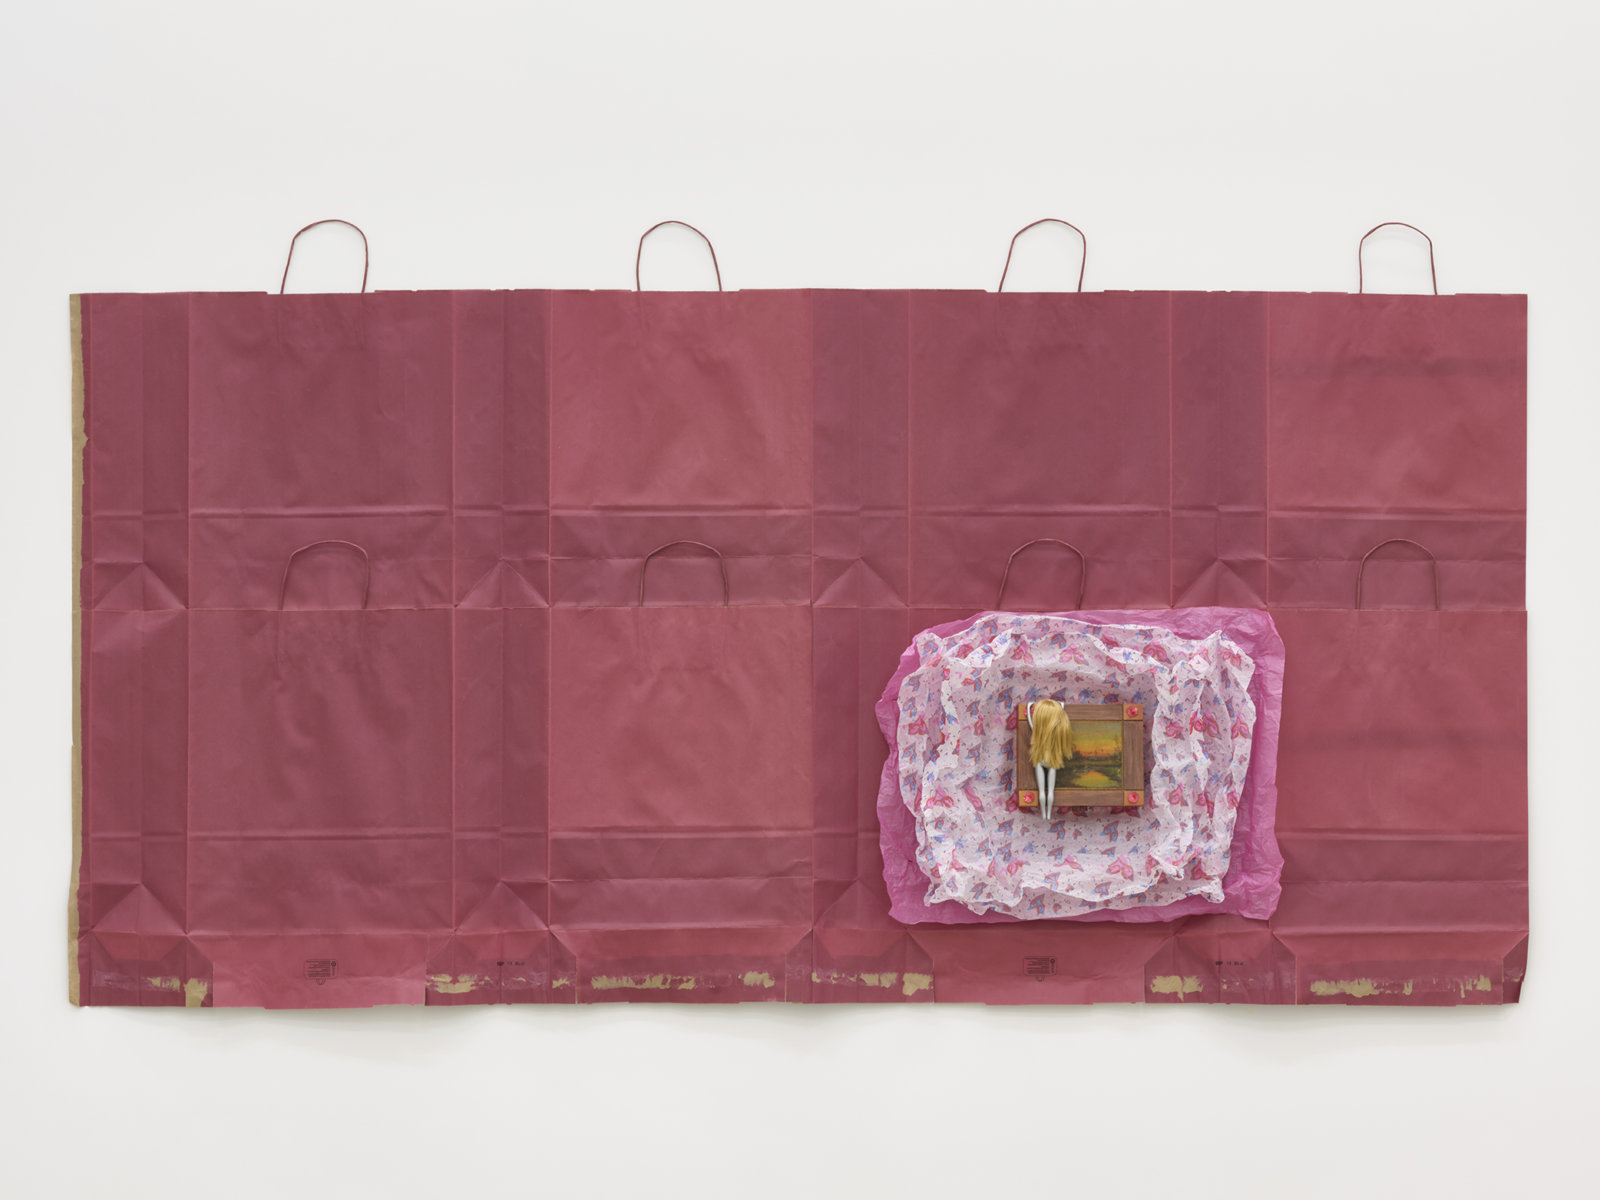 Liz Magor, Gateway, 2020, painted doll, wooden box, packaging materials, 43 x 88 x 3 in. (109 x 222 x 8 cm)